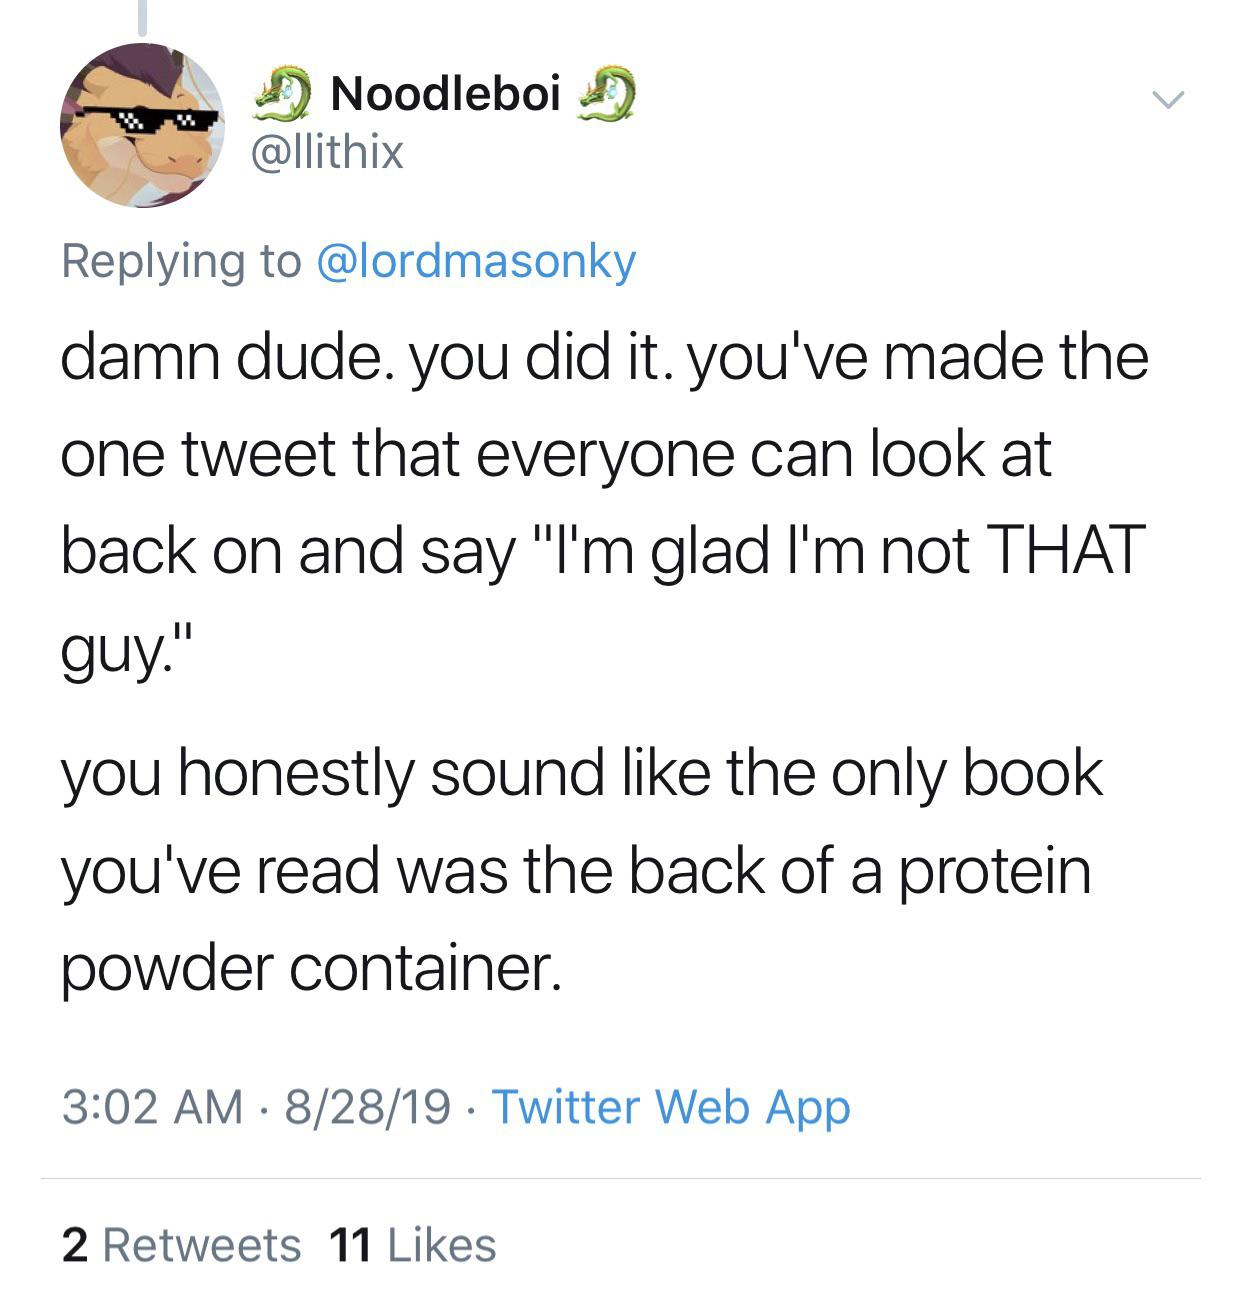 Noodleboi D damn dude. you did it. you've made the one tweet that everyone can look at back on and say "I'm glad I'm not That guy." you honestly sound the only book you've read was the back of a protein powder container. 82819 . Twitter Web App 2 11